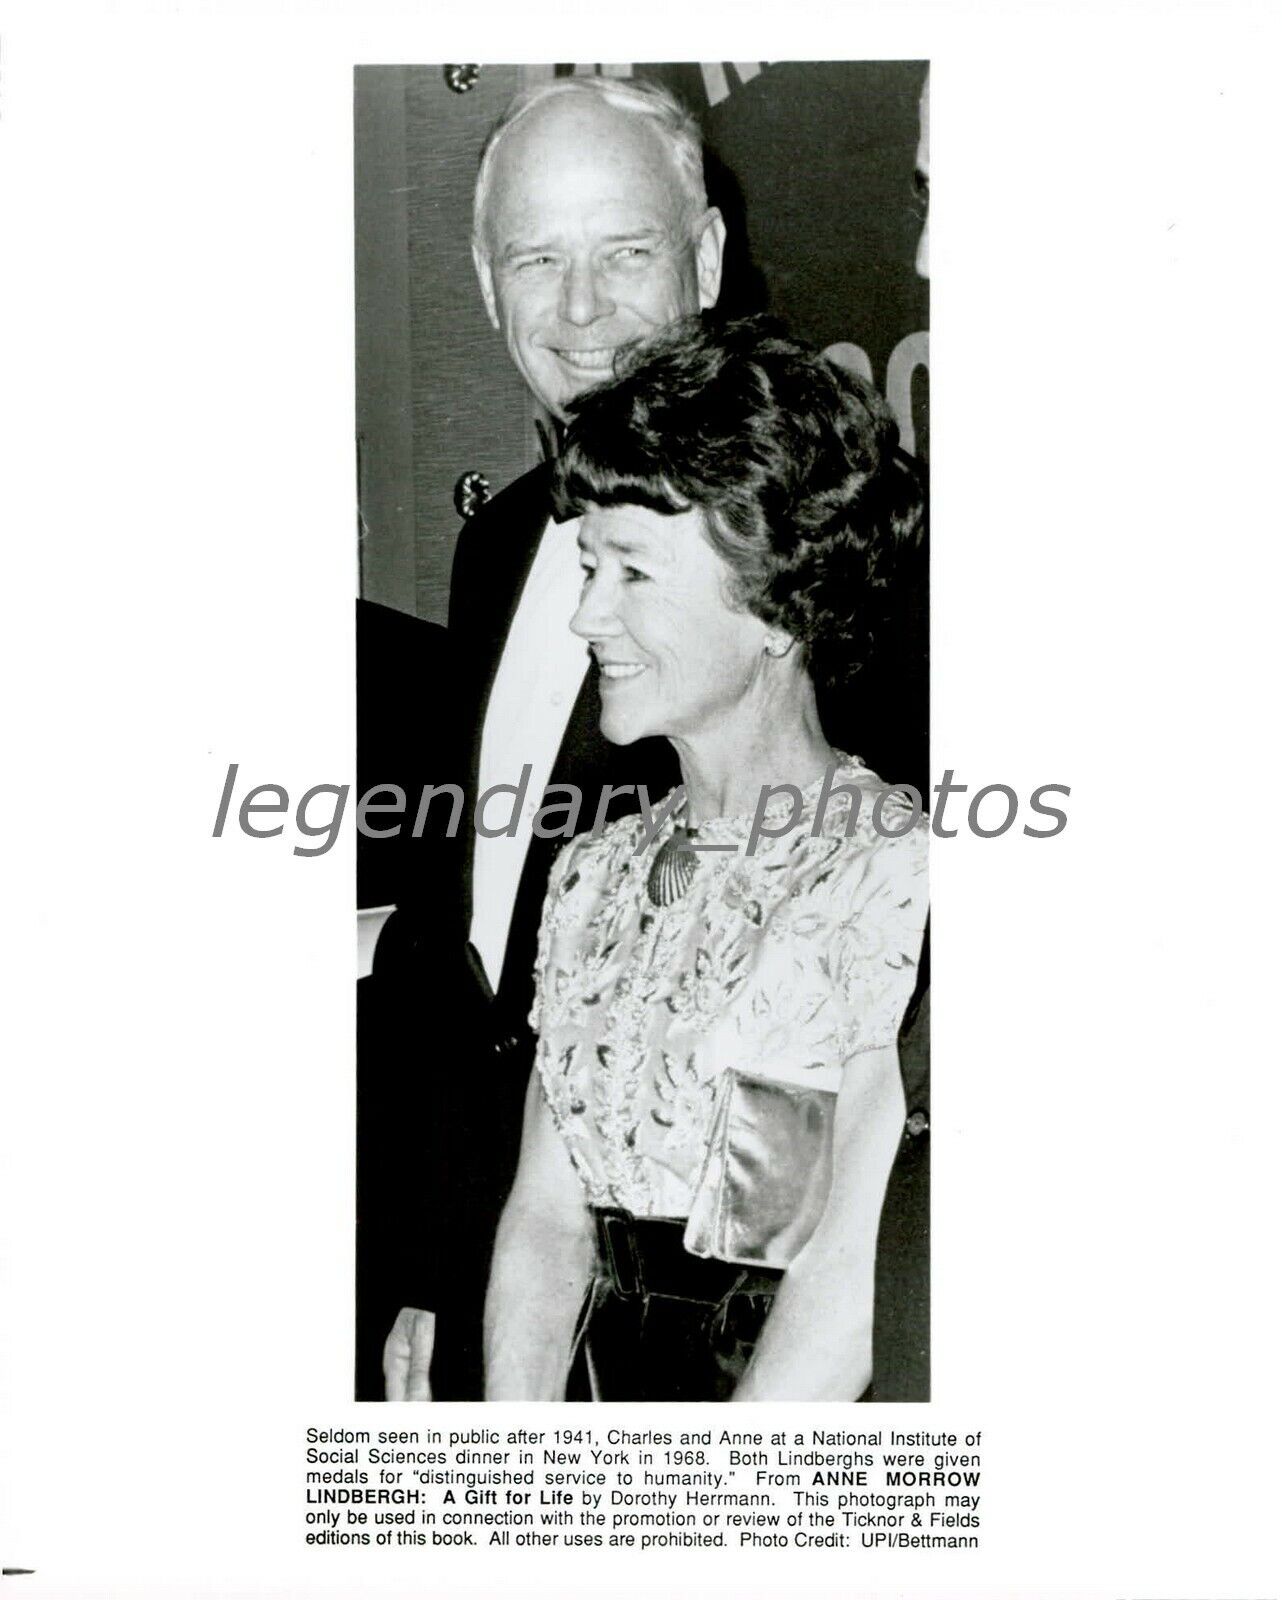 1968 Charles and Anne Lindbergh at Sciences Dinner Original News Service Photo